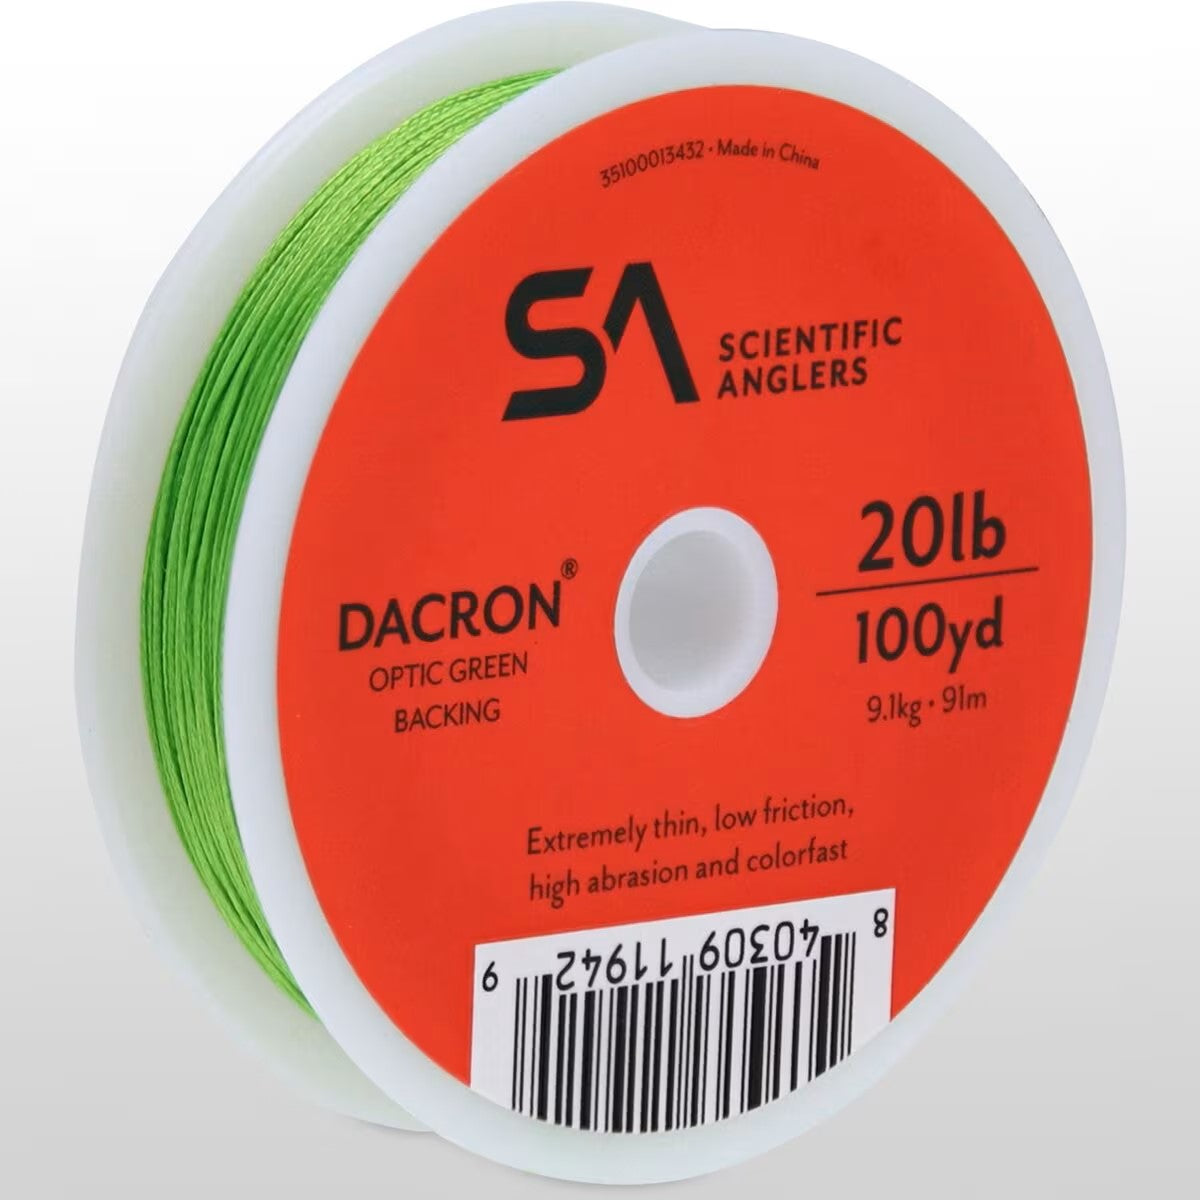 Scientific Anglers Dacron Backing in Blue 30lb - 250yds